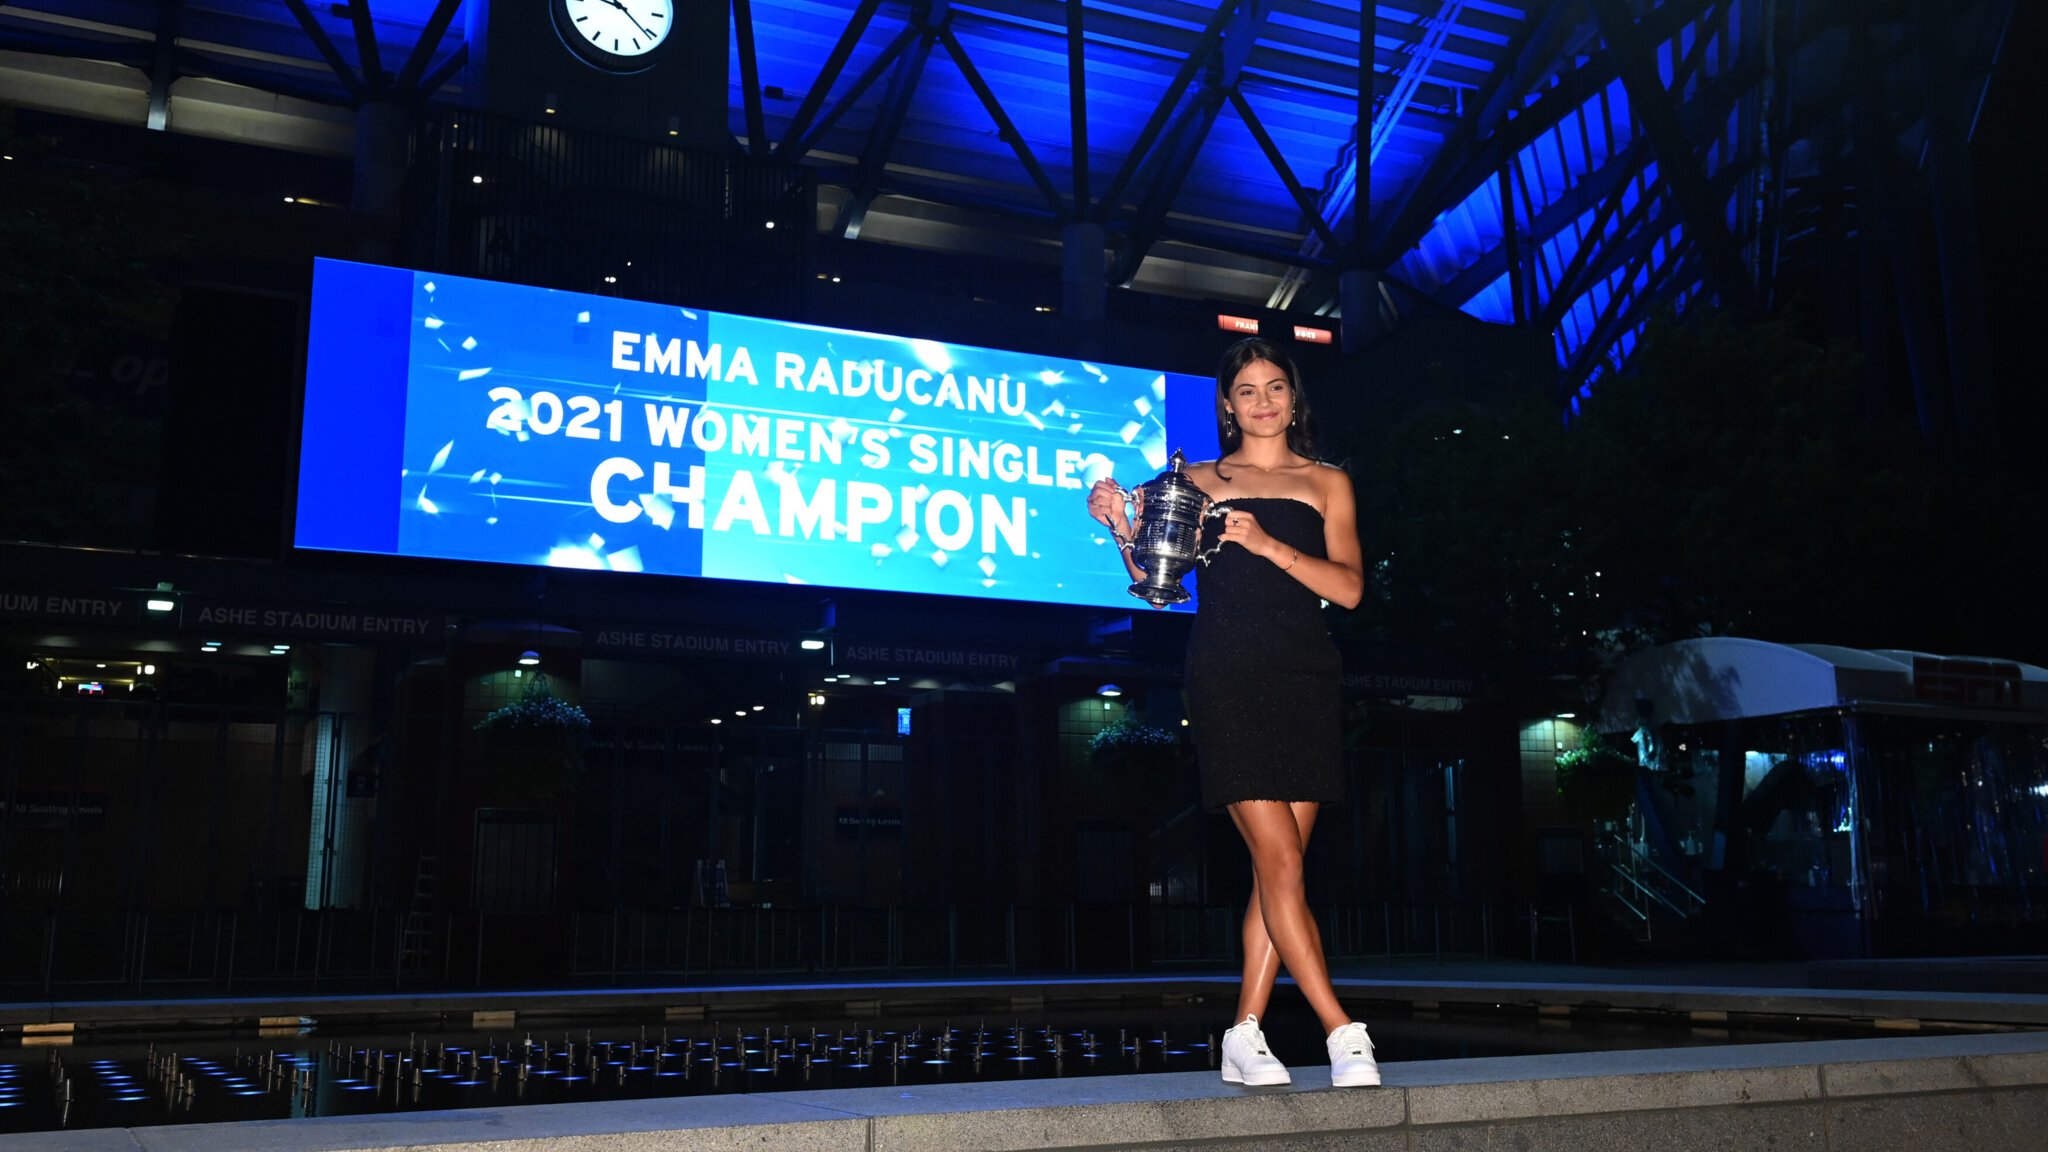 US Open Final: 18 Year Old Raducanu Scripts History, Becomes First British Woman To Win Slam In 41 Years